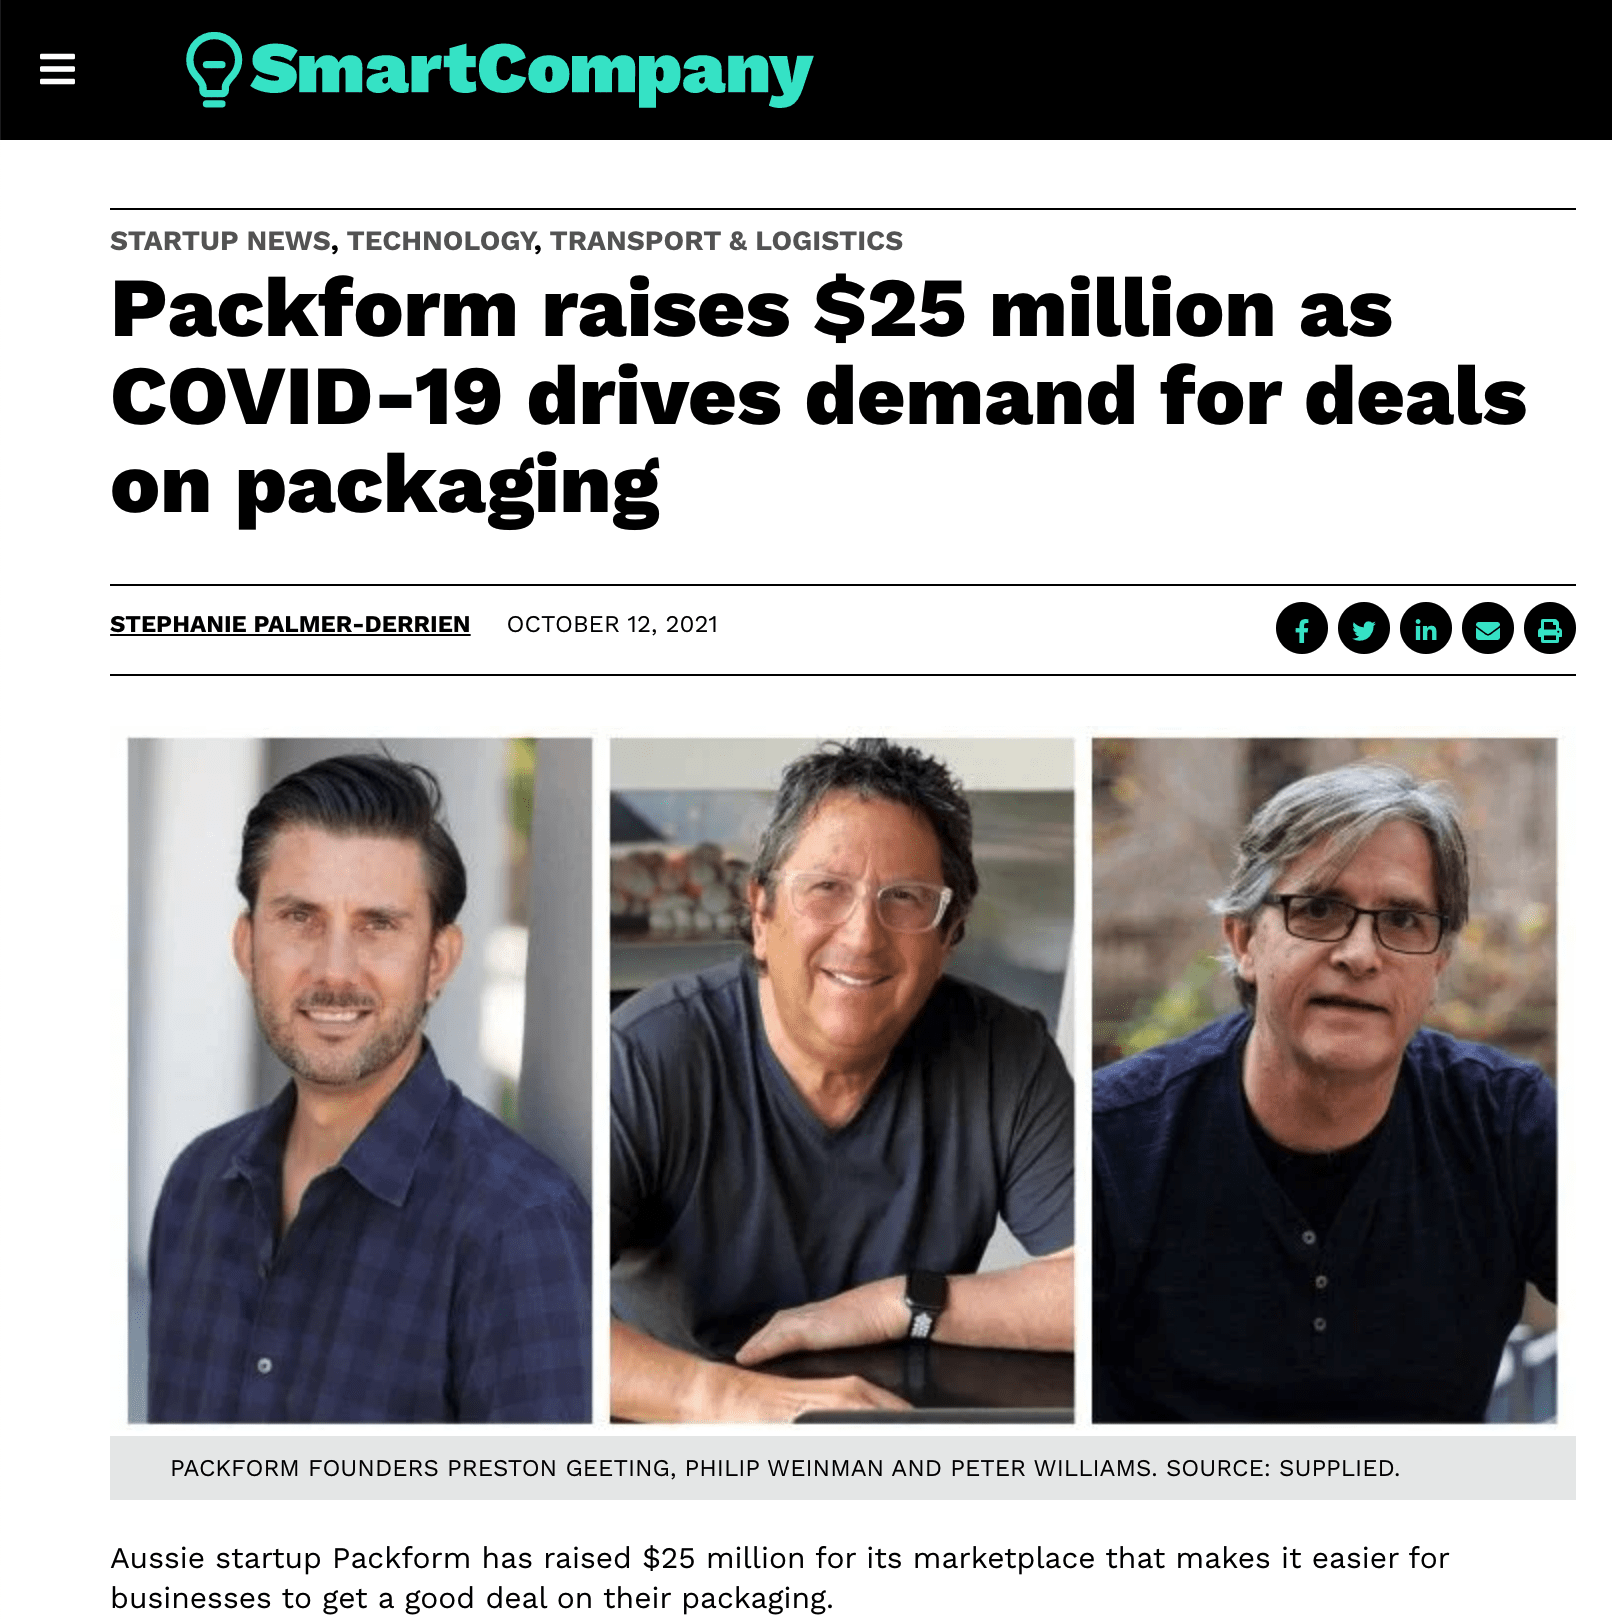 Packform raises $25 million as COVID-19 drives demand for deals on packaging